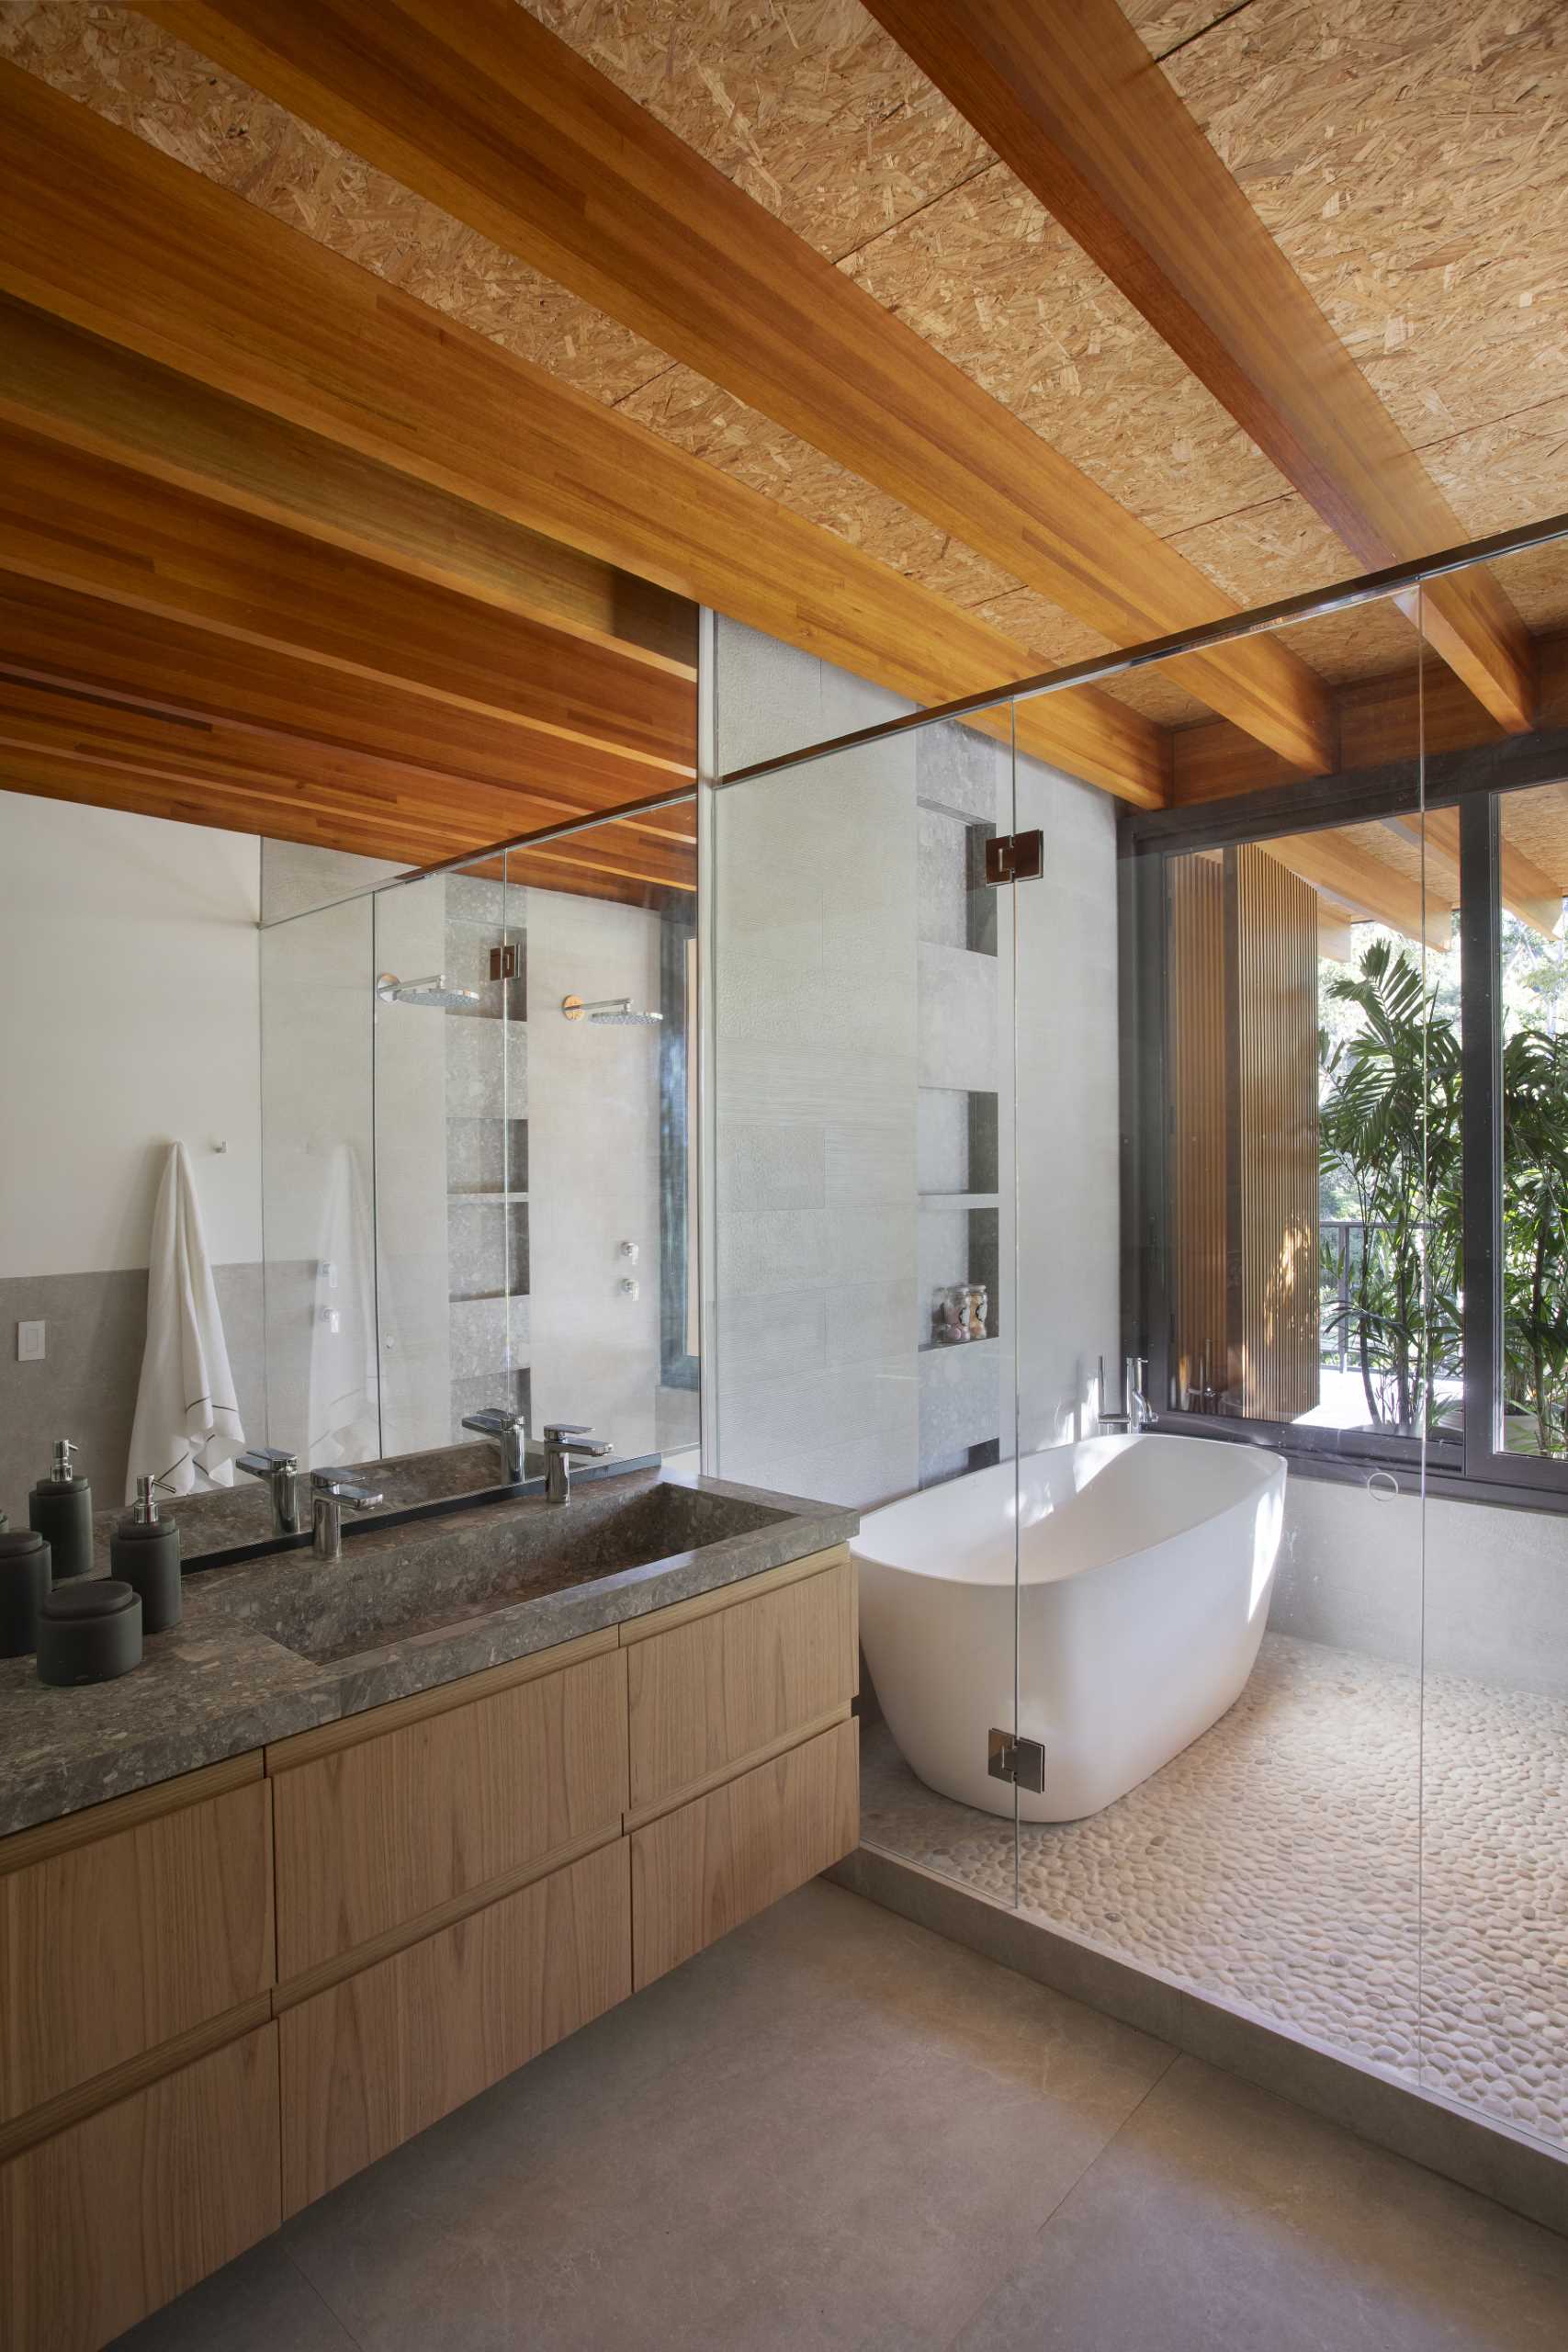 In this modern bathroom, there's a wet room that includes a freestanding bathtub, shower, and shelving niches.